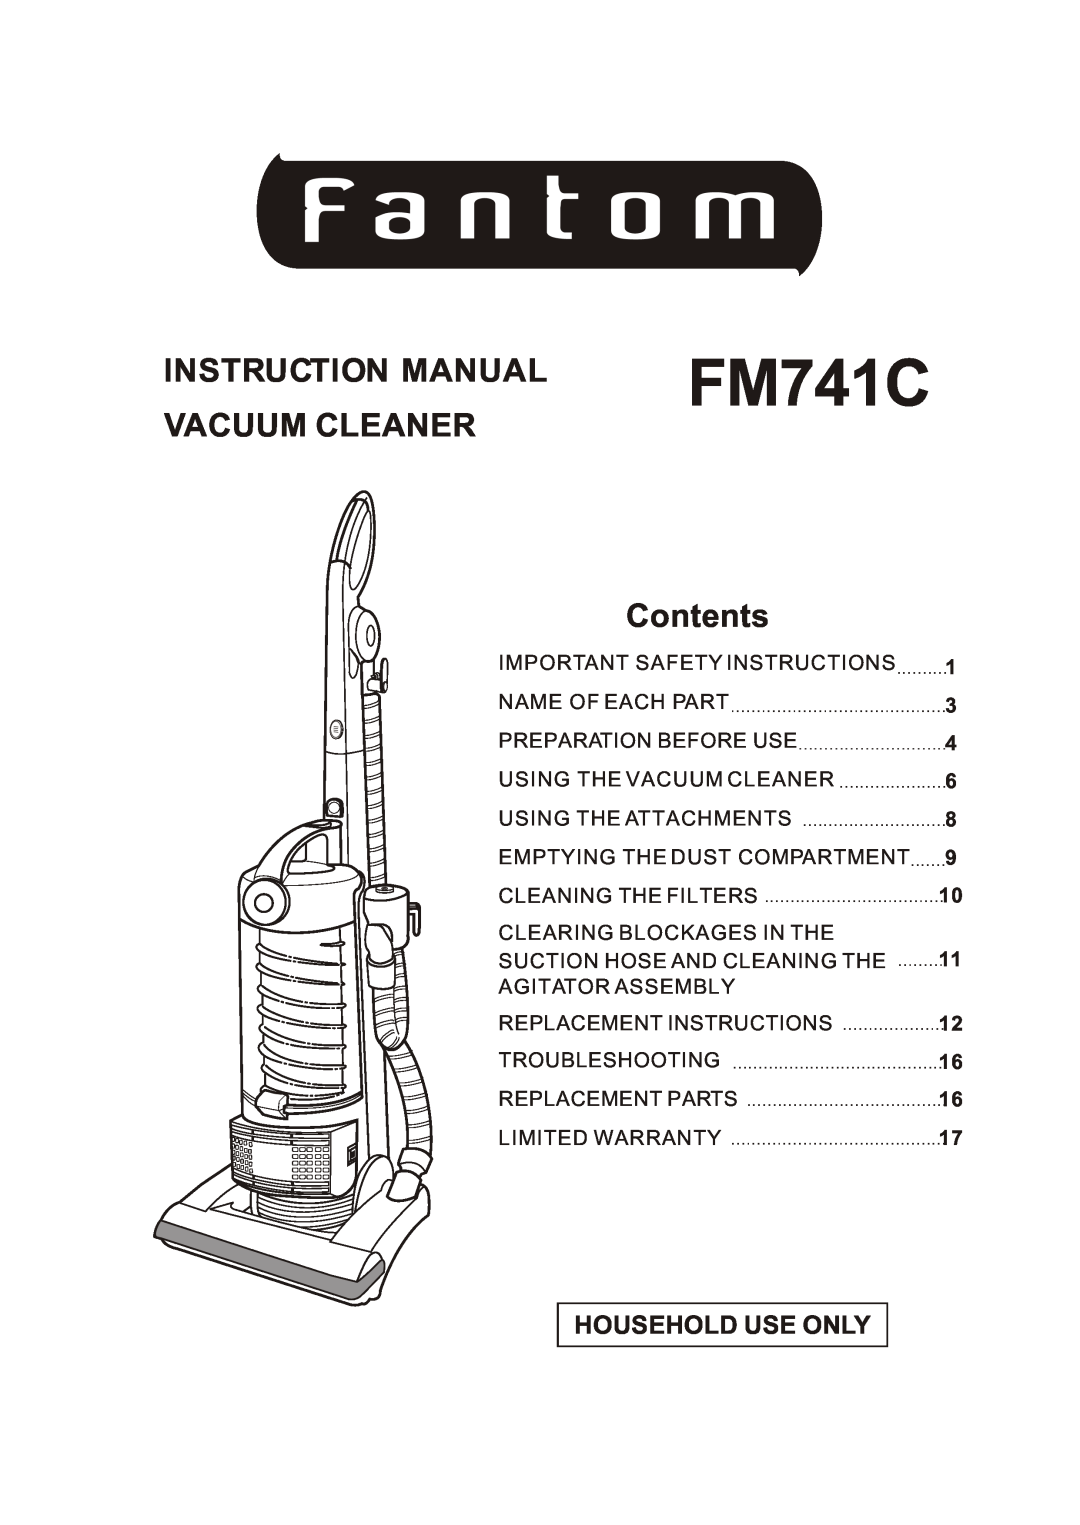 Fantom Vacuum FM741C instruction manual Instruction Manual, Vacuum Cleaner, Contents, Household Use Only 